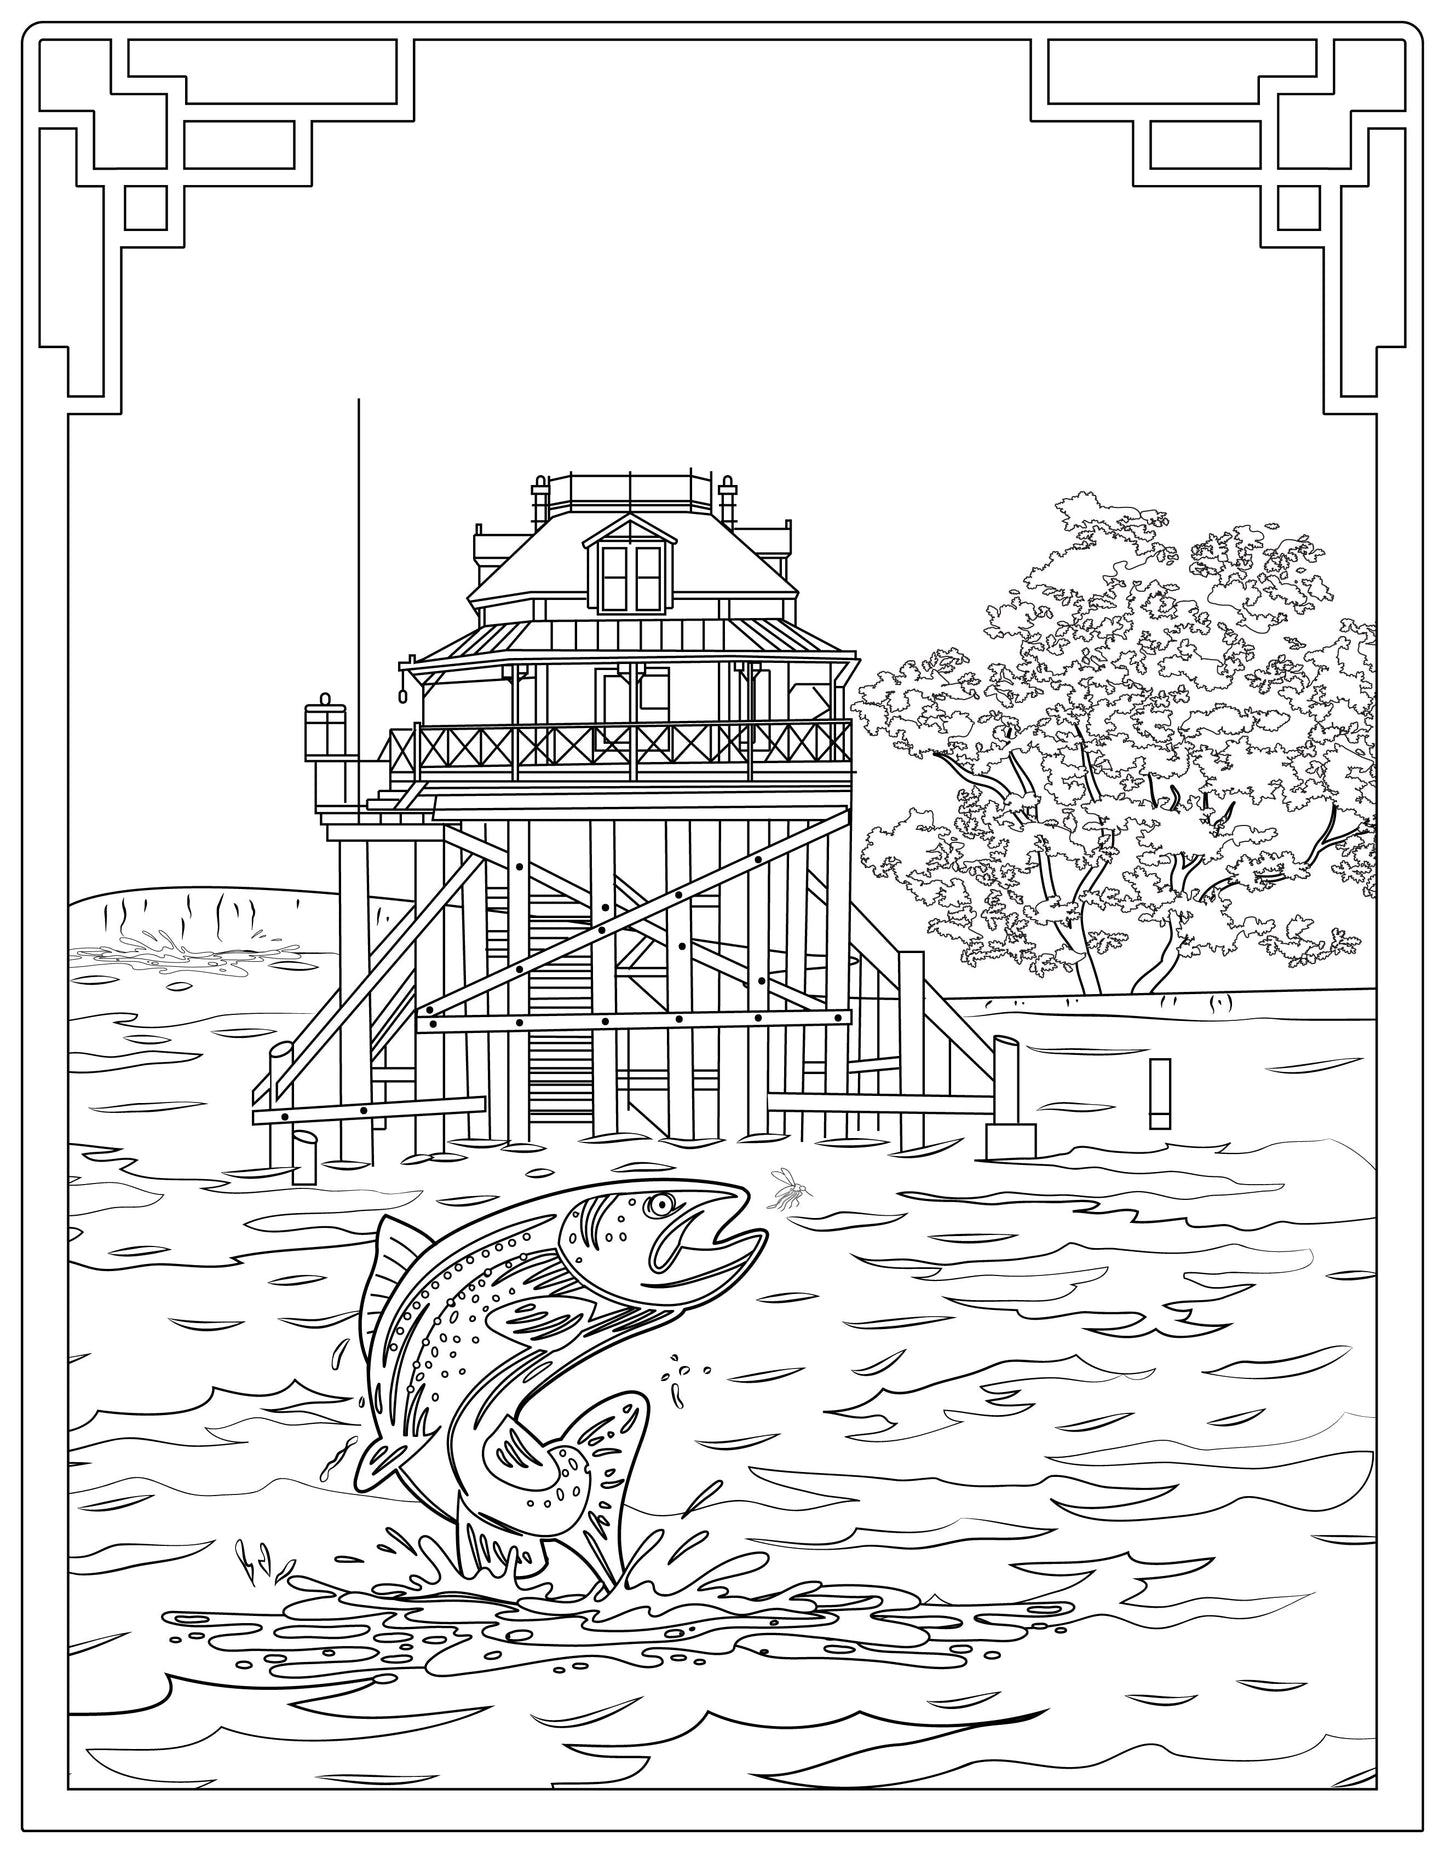 Single Coloring Book Page - Willamette River Lighthouse, Oregon - Digital Print-from-Home